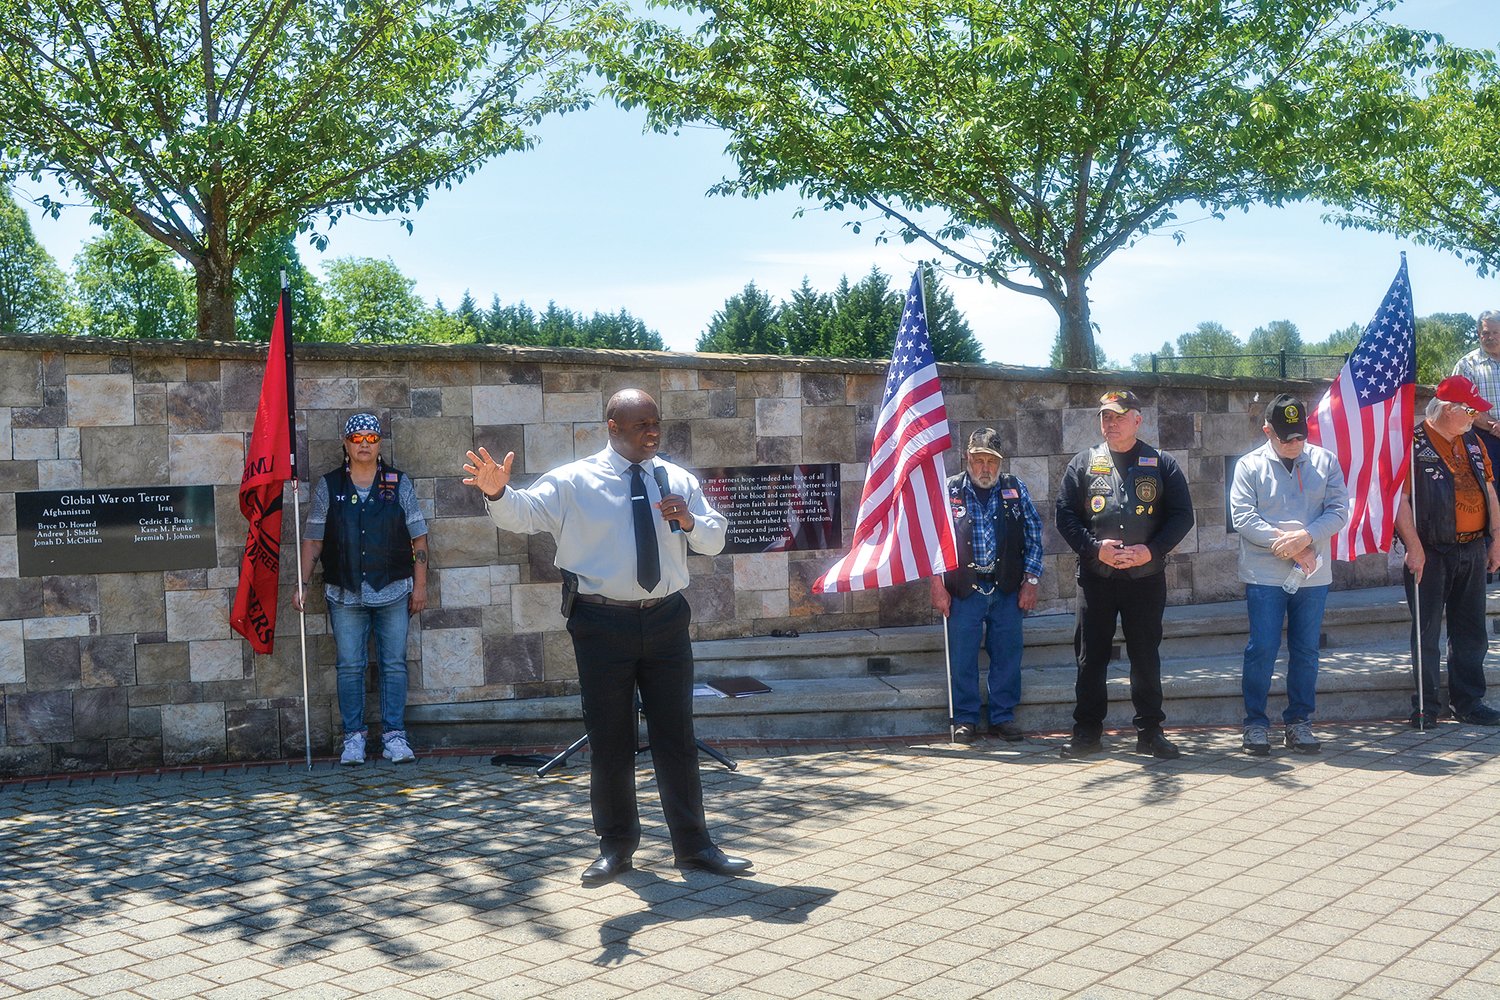 Vancouver Police Department Cpl. Rey Reynolds sings “God Bless the USA” at the Never to be Forgotten ceremony on May 31.